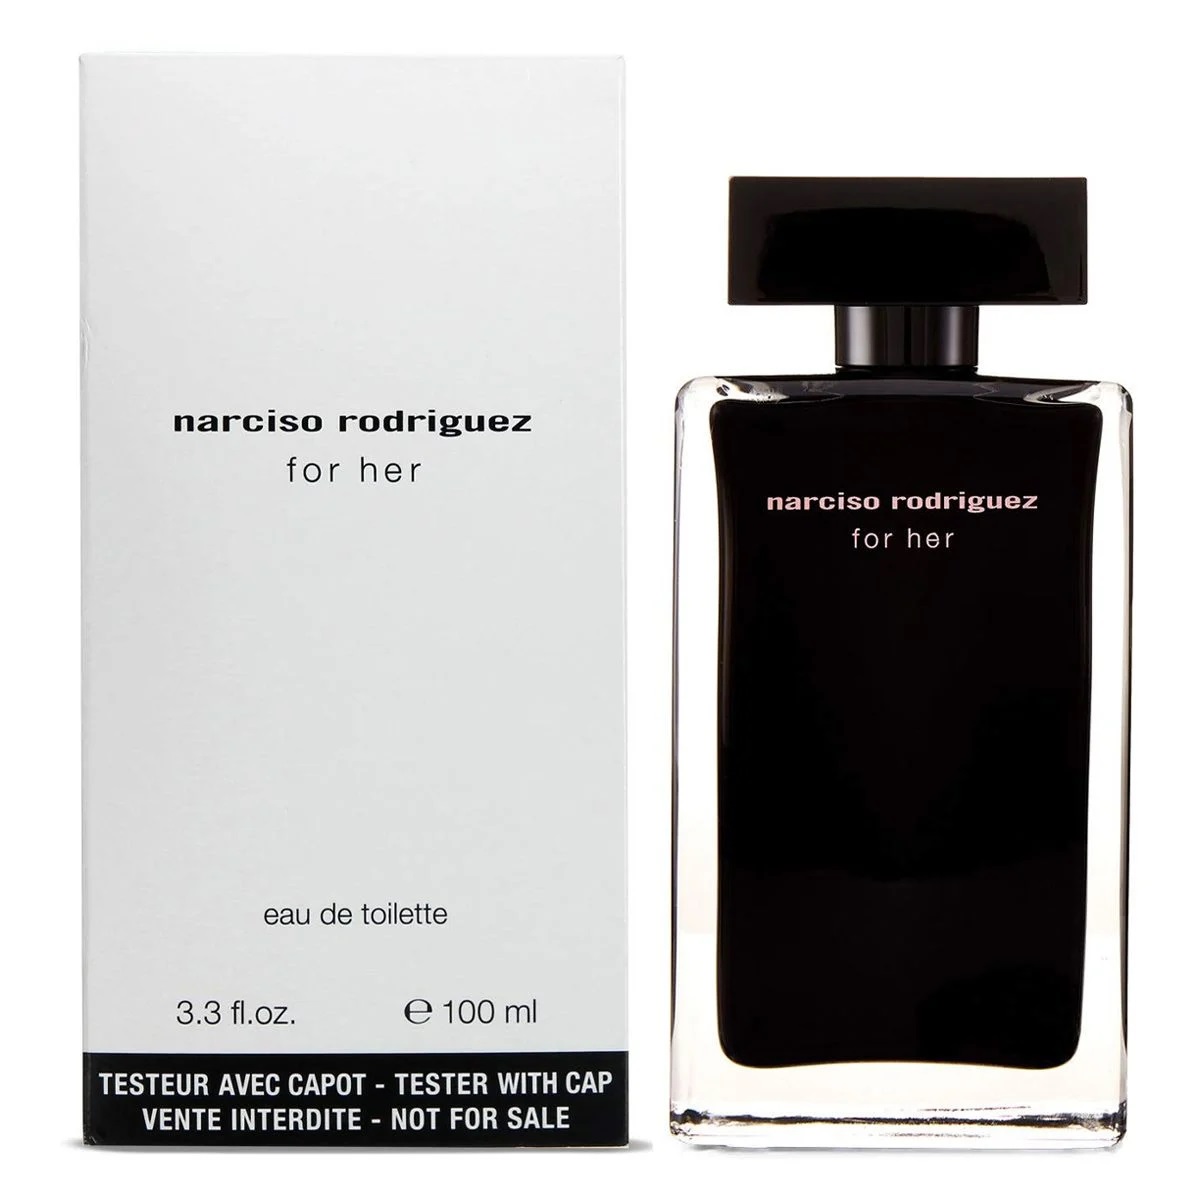 NƯỚC HOA NARCISO RODRIGUEZ FOR HER EDT 10